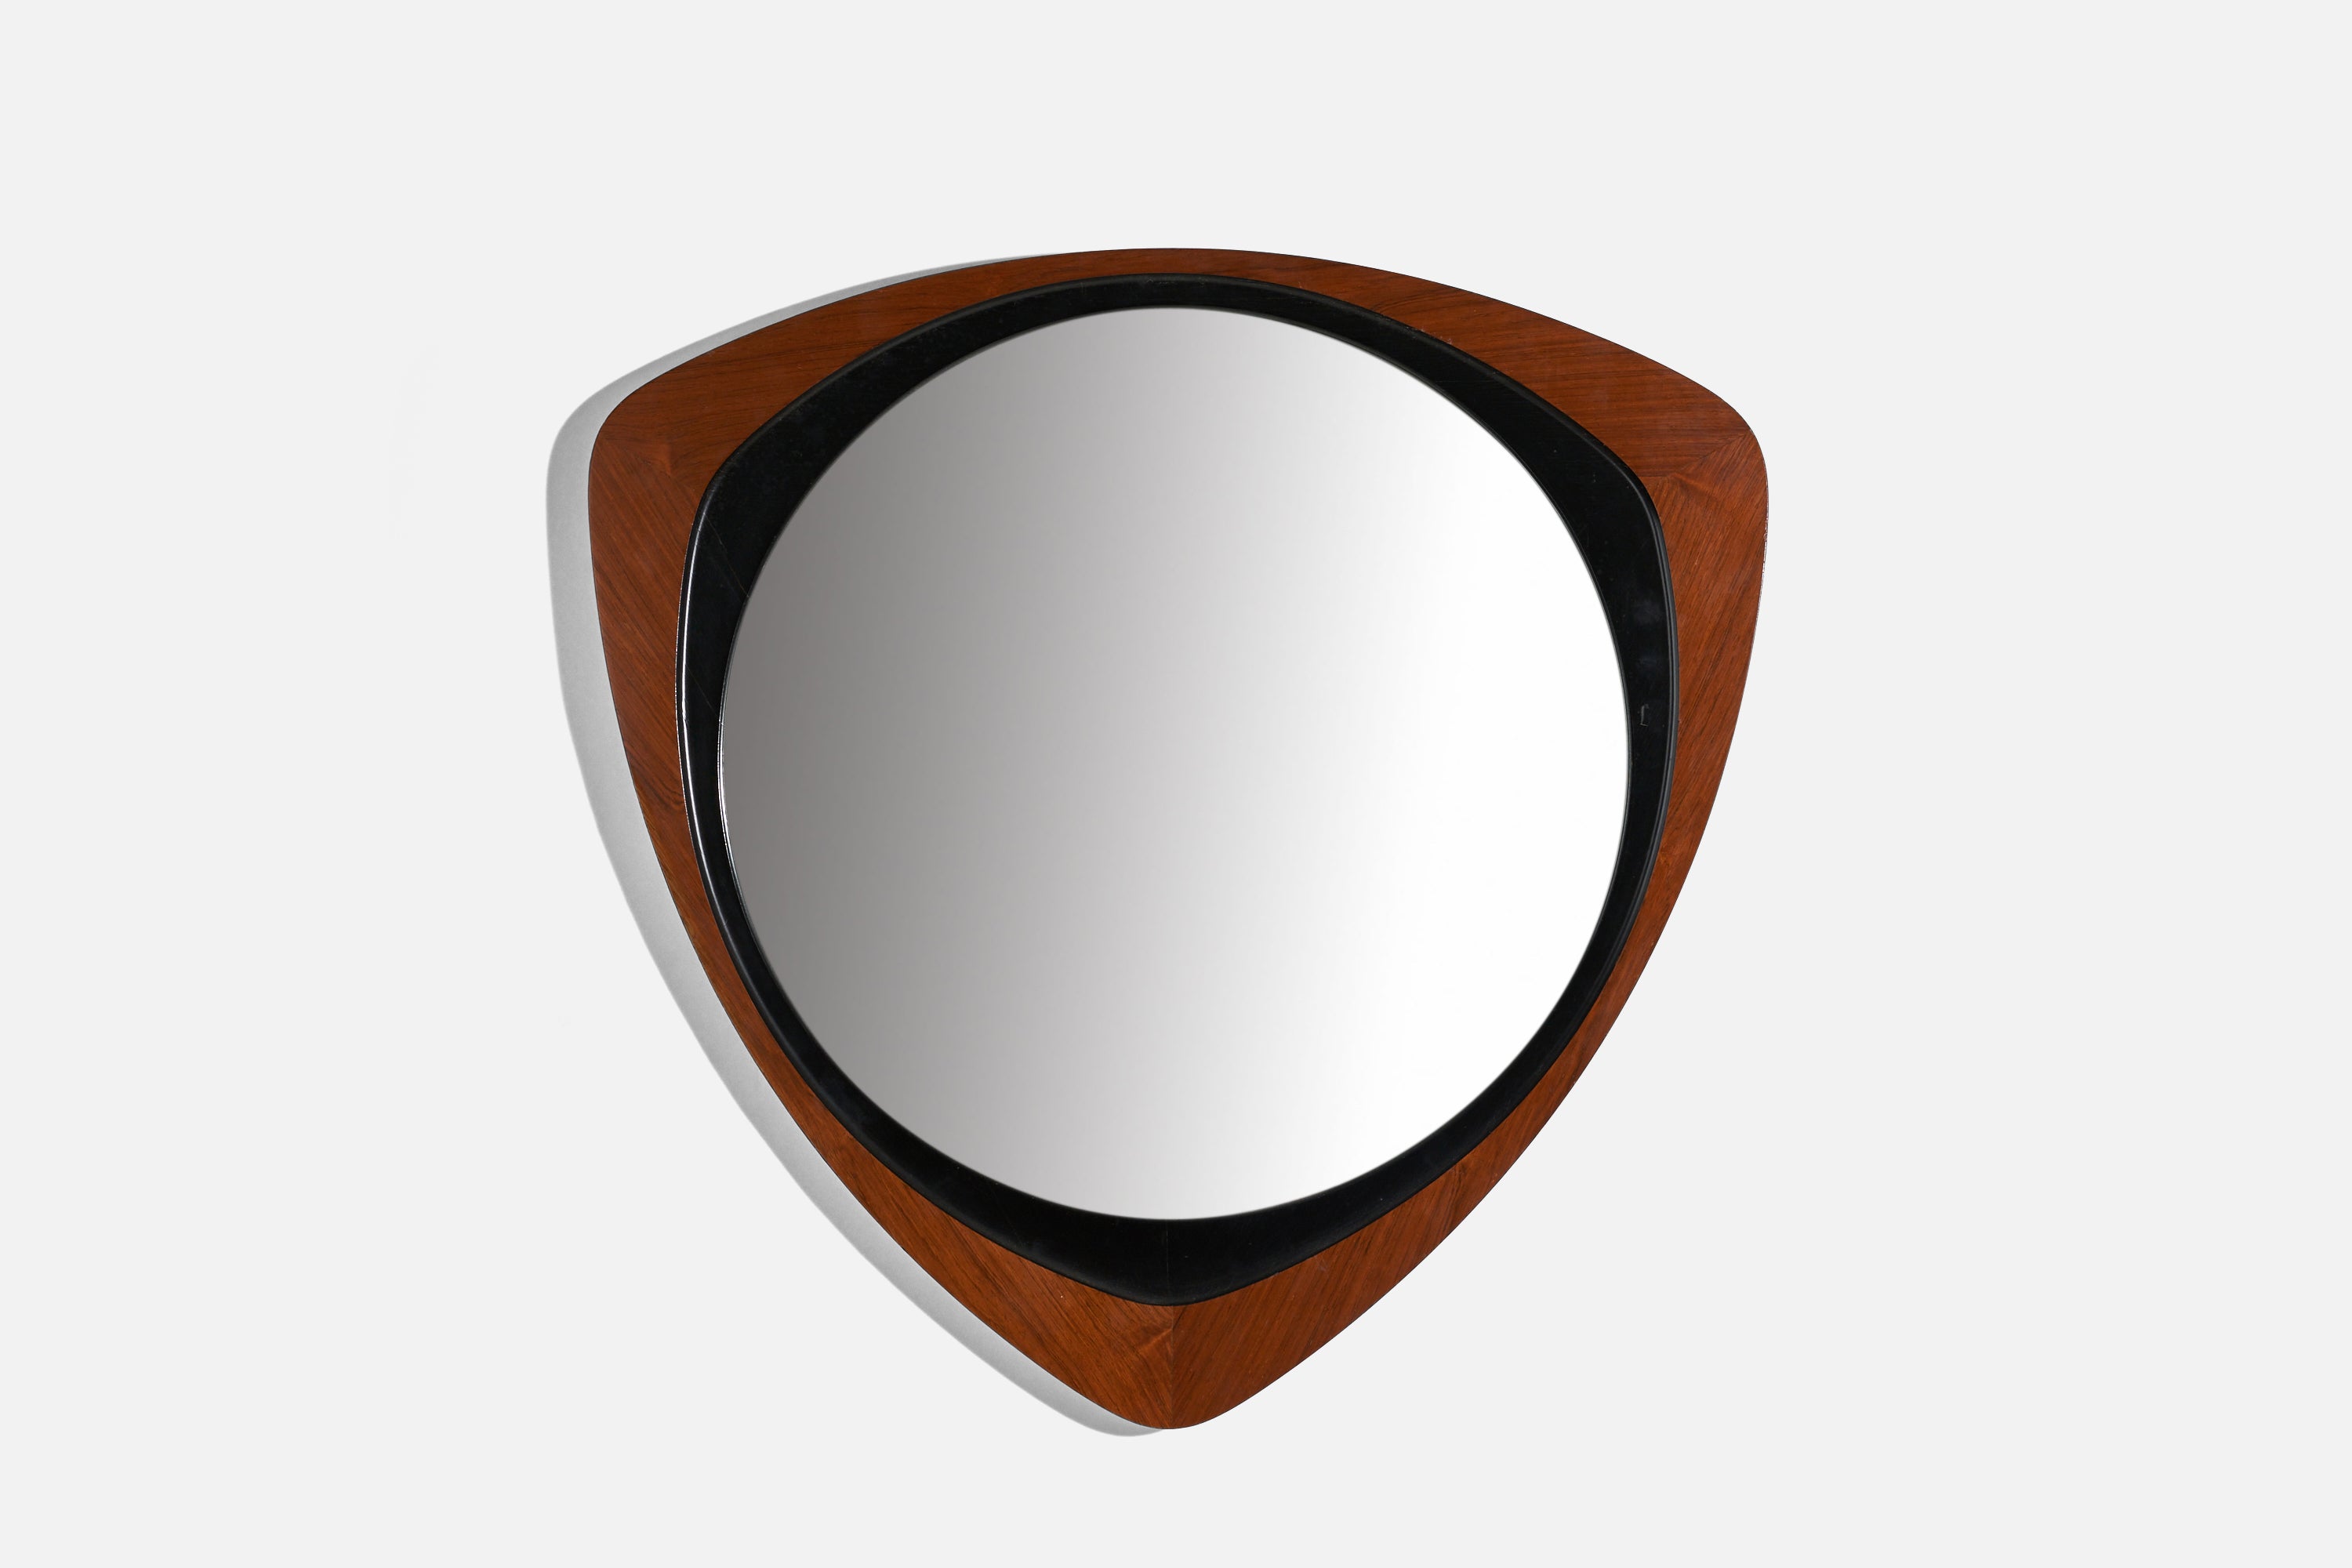 Glas & Trä, Wall Mirror, Rosewood, Black-Painted Wood, Sweden, 1950s For Sale